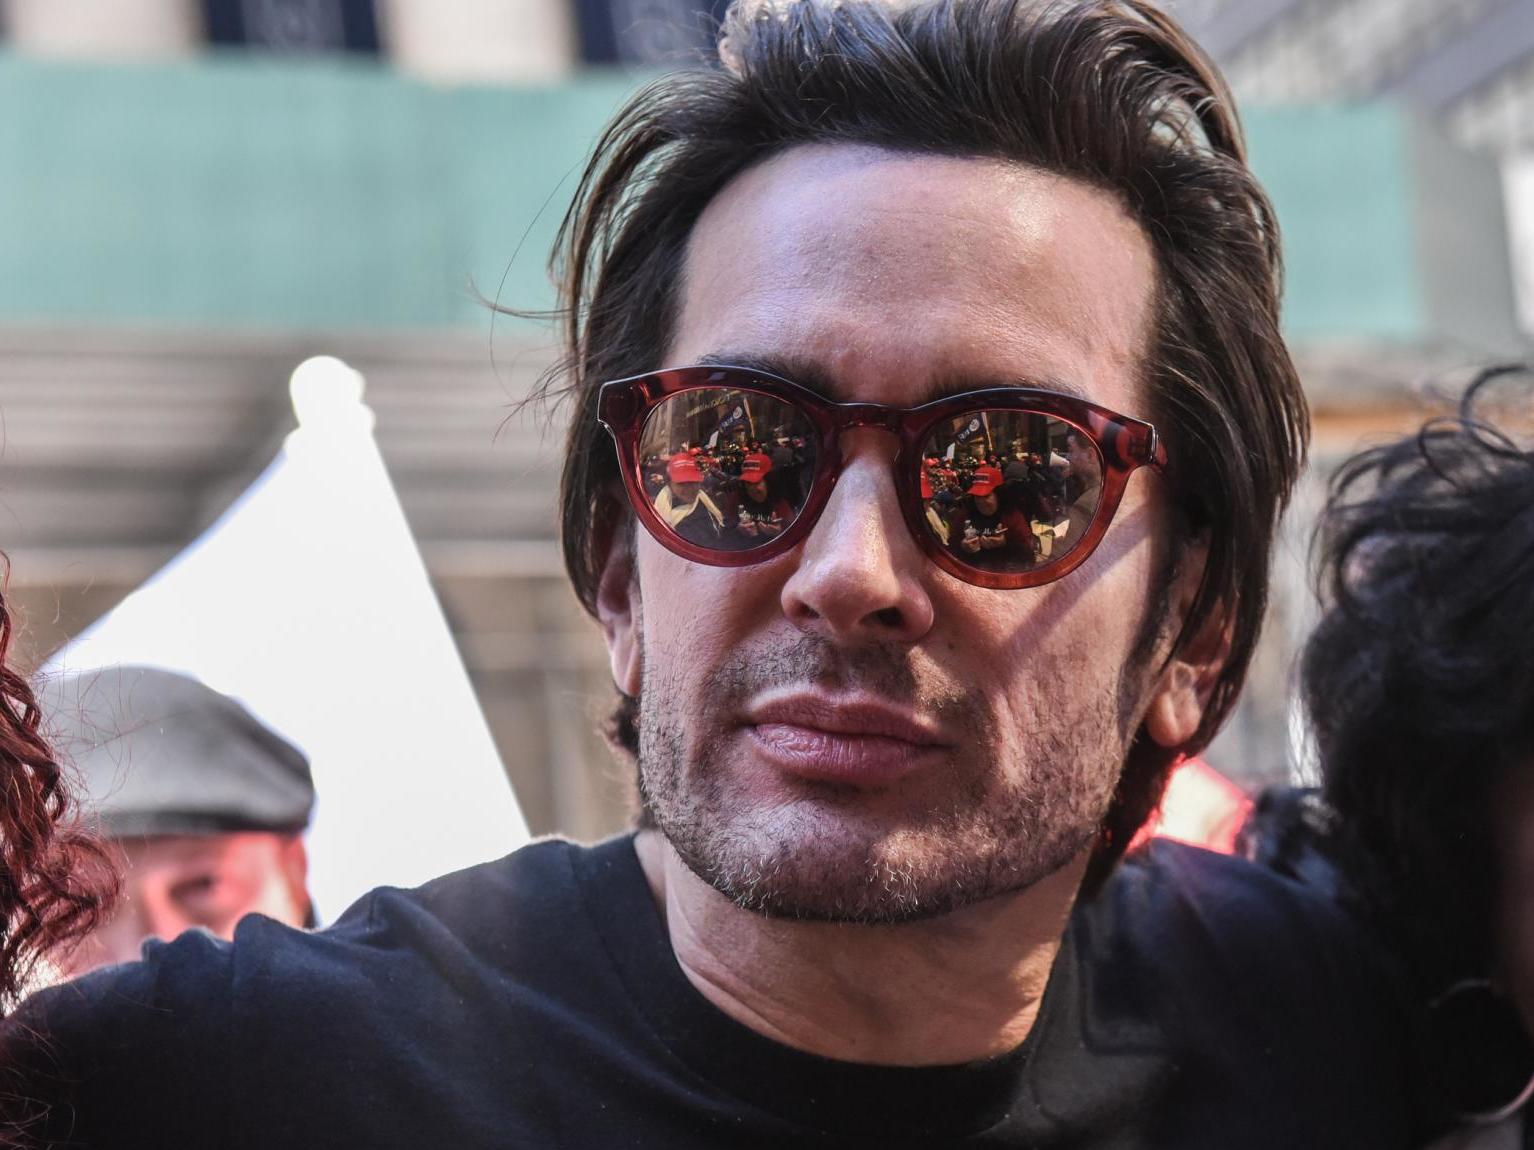 Brandon Straka, founder of the 'WalkAway' movement, attends a rally in support of US President Donald Trump